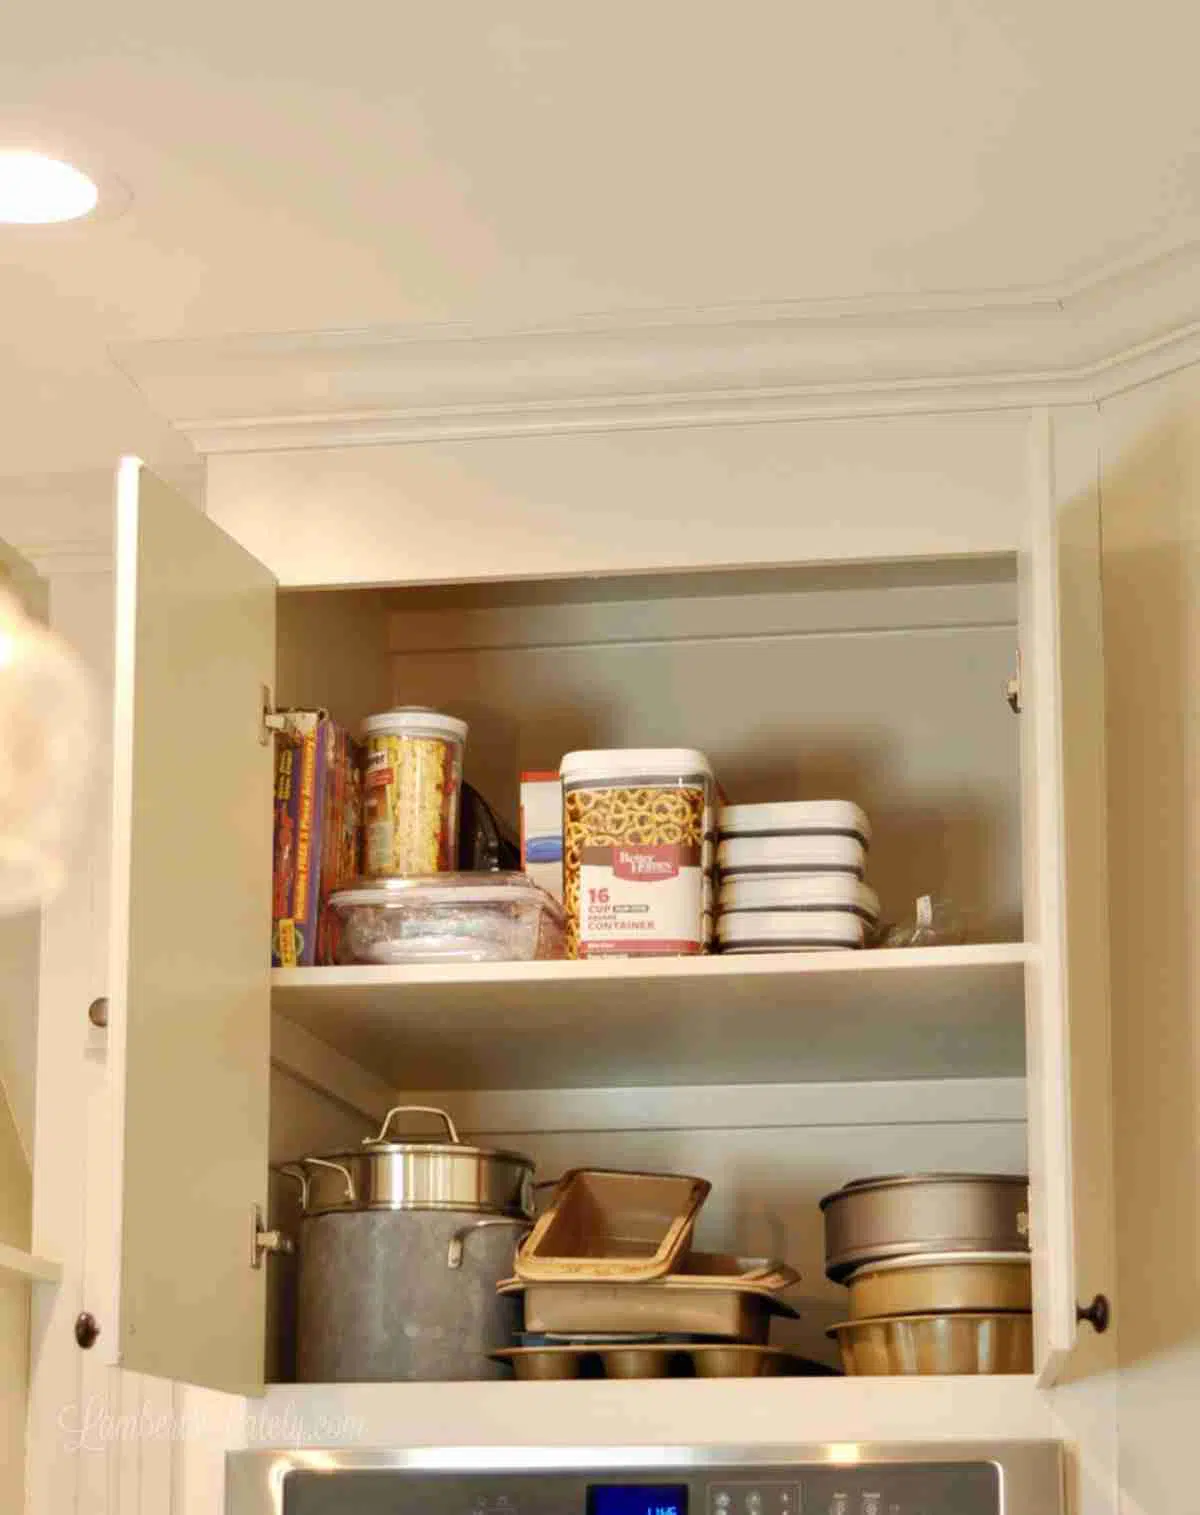 kitchen cabinet holding pots, pans, containers.